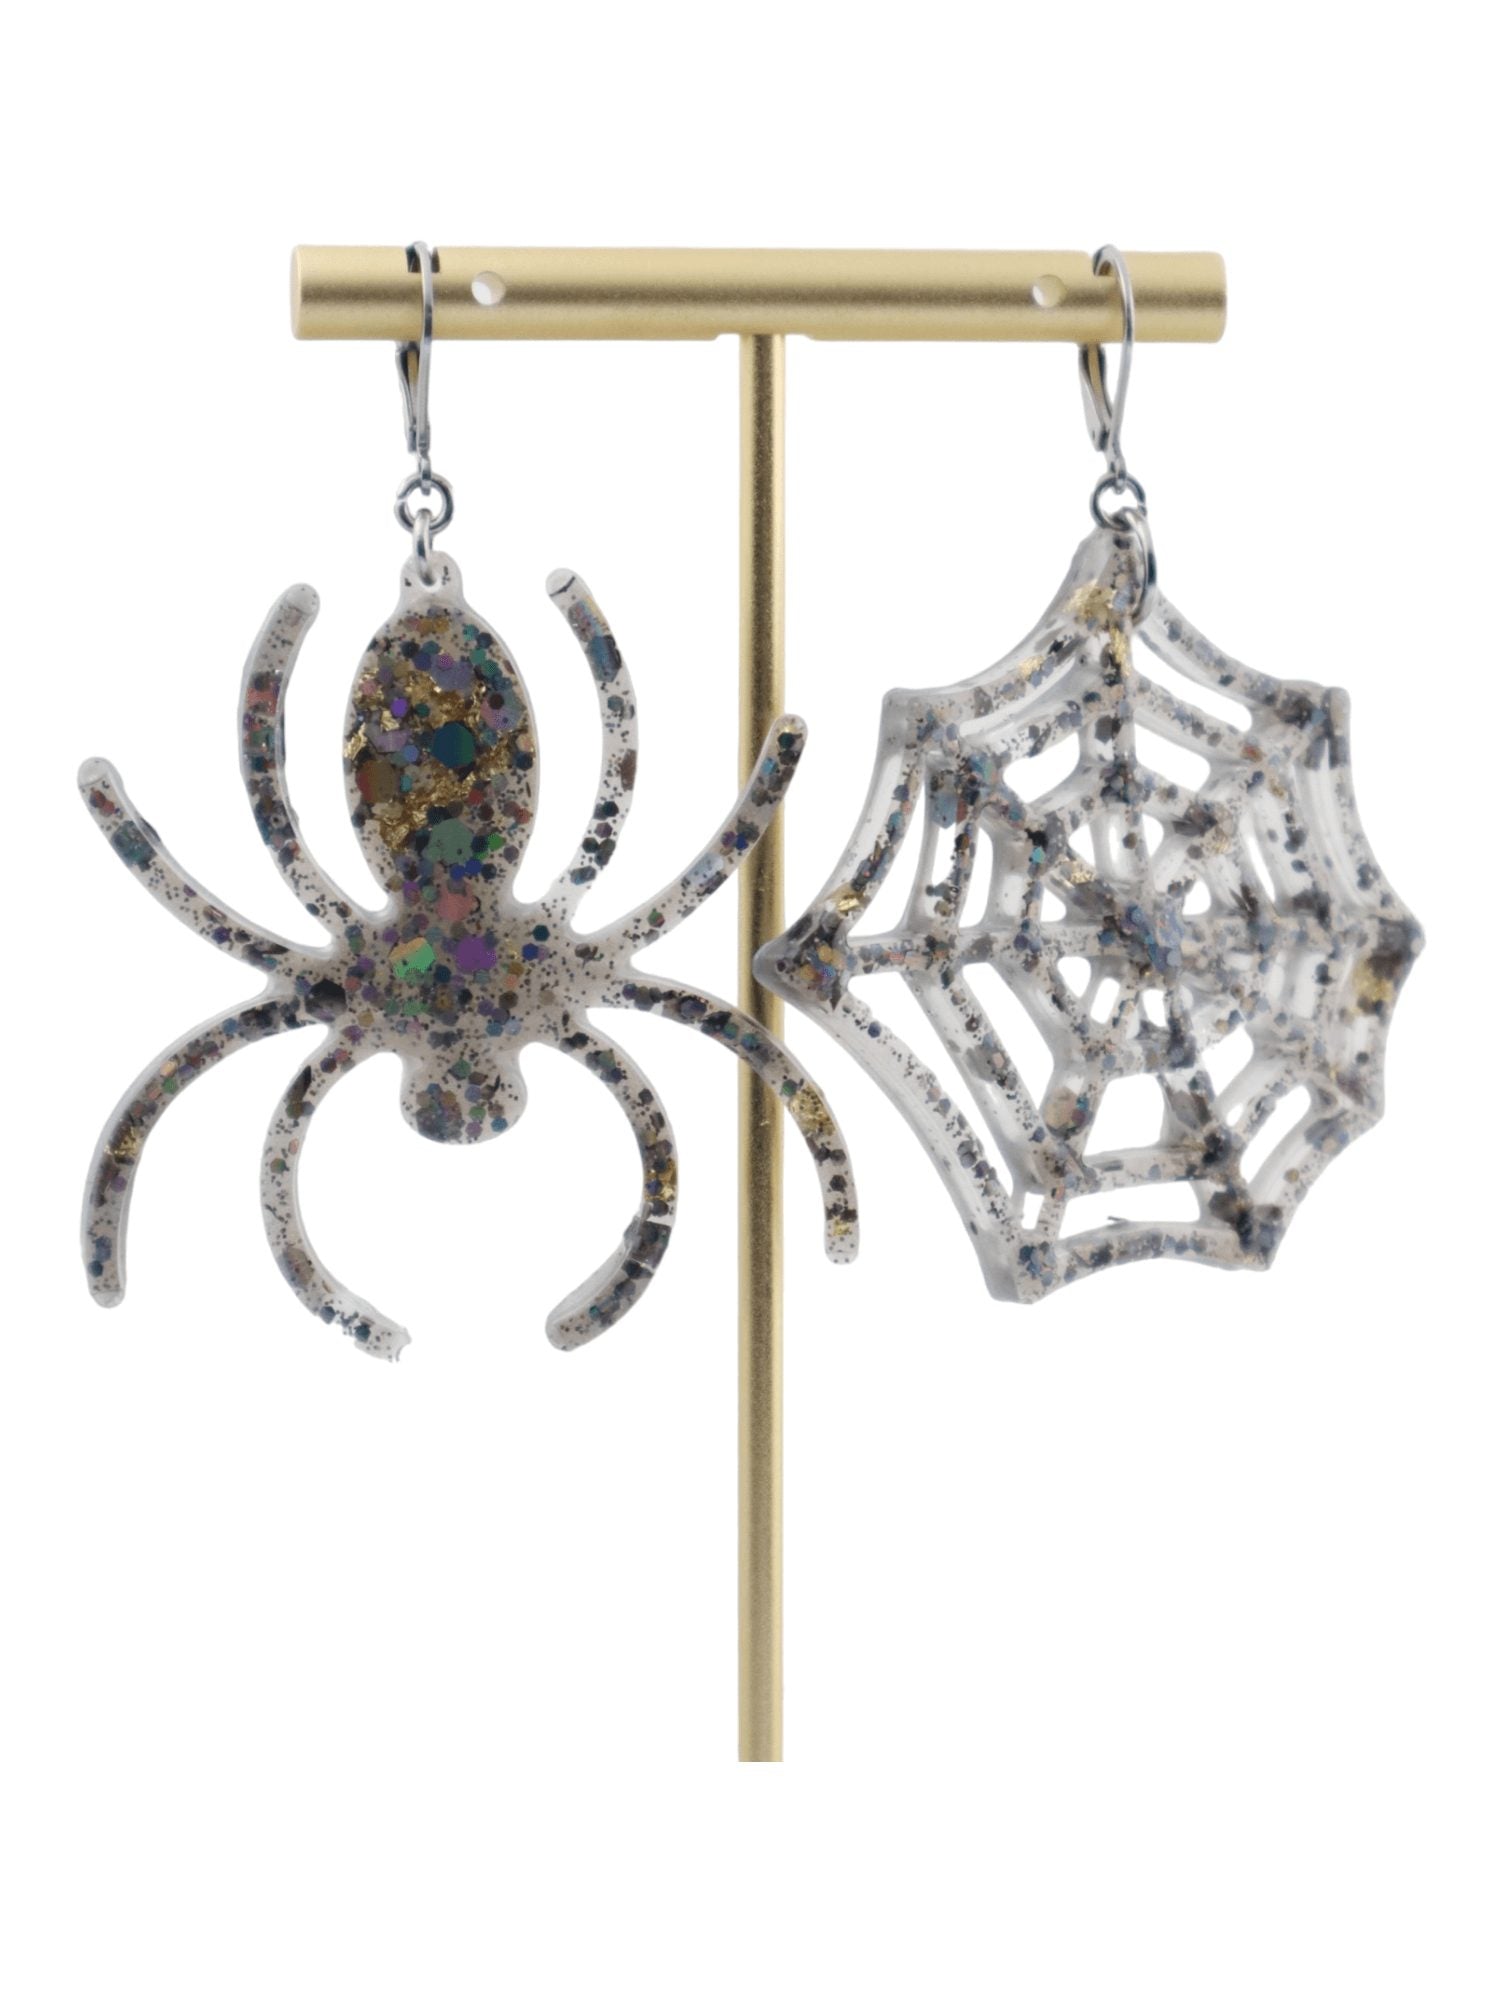 Spiderweb-Earrings---Chrome-&-Silver-Glittery-Earrings---FRONT--Kaleidoscopes-And-Polka-Dots